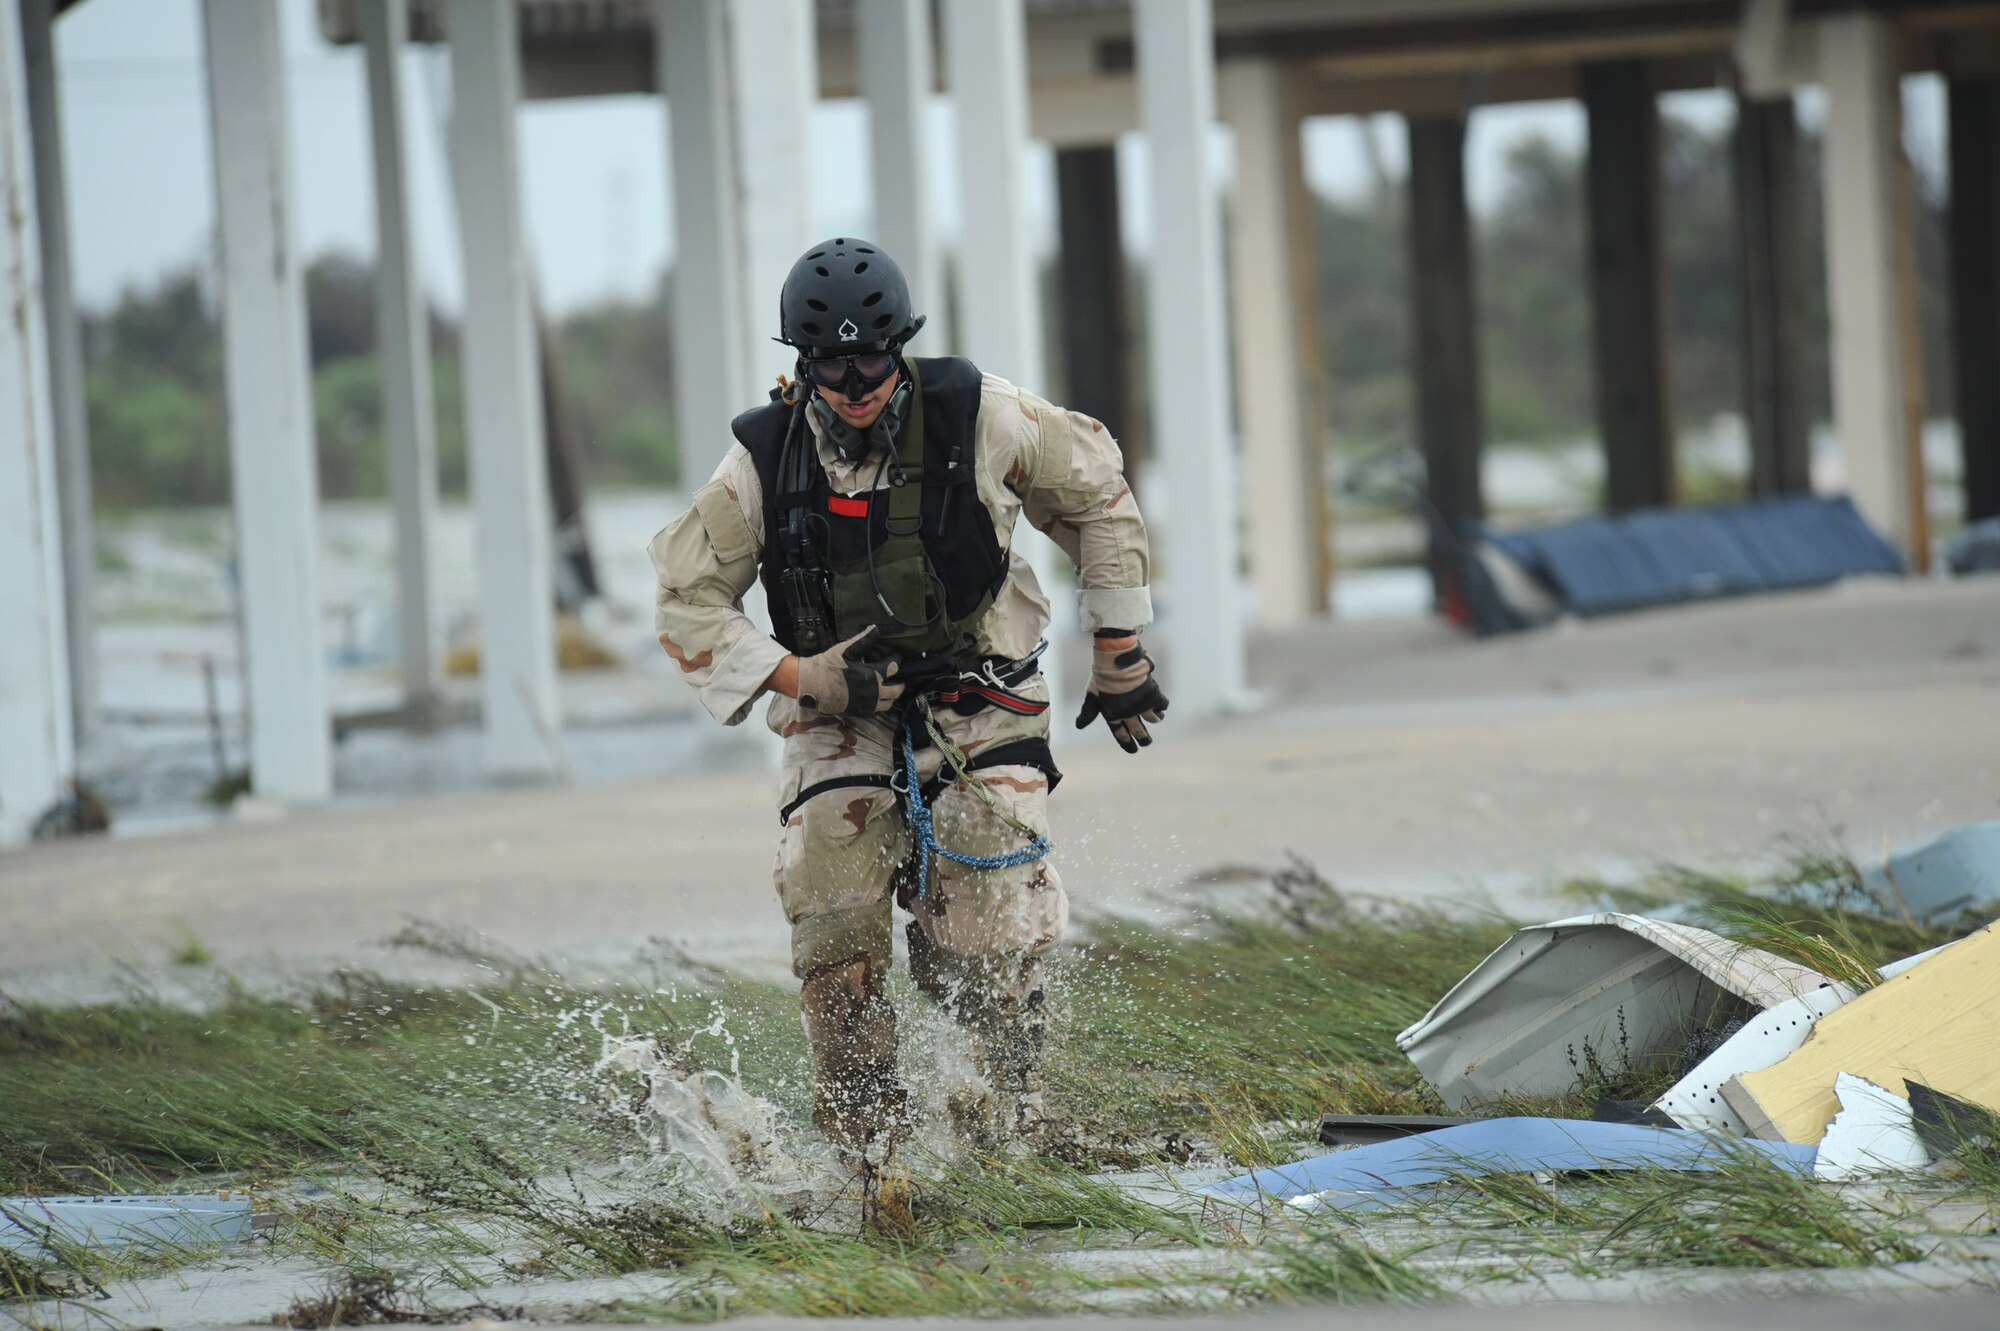 Pararescueman Staff Sgt. Lopaka Mounts conducts search and rescue operations in Galveston, Texas, after Hurricane Ike, Sept. 13. Sergeant Mounts is assigned to the 331st Air Expeditionary Group at Randolph Air Force Base, Texas. (U.S. Air Force photo/Staff Sgt. James L. Harper Jr.)